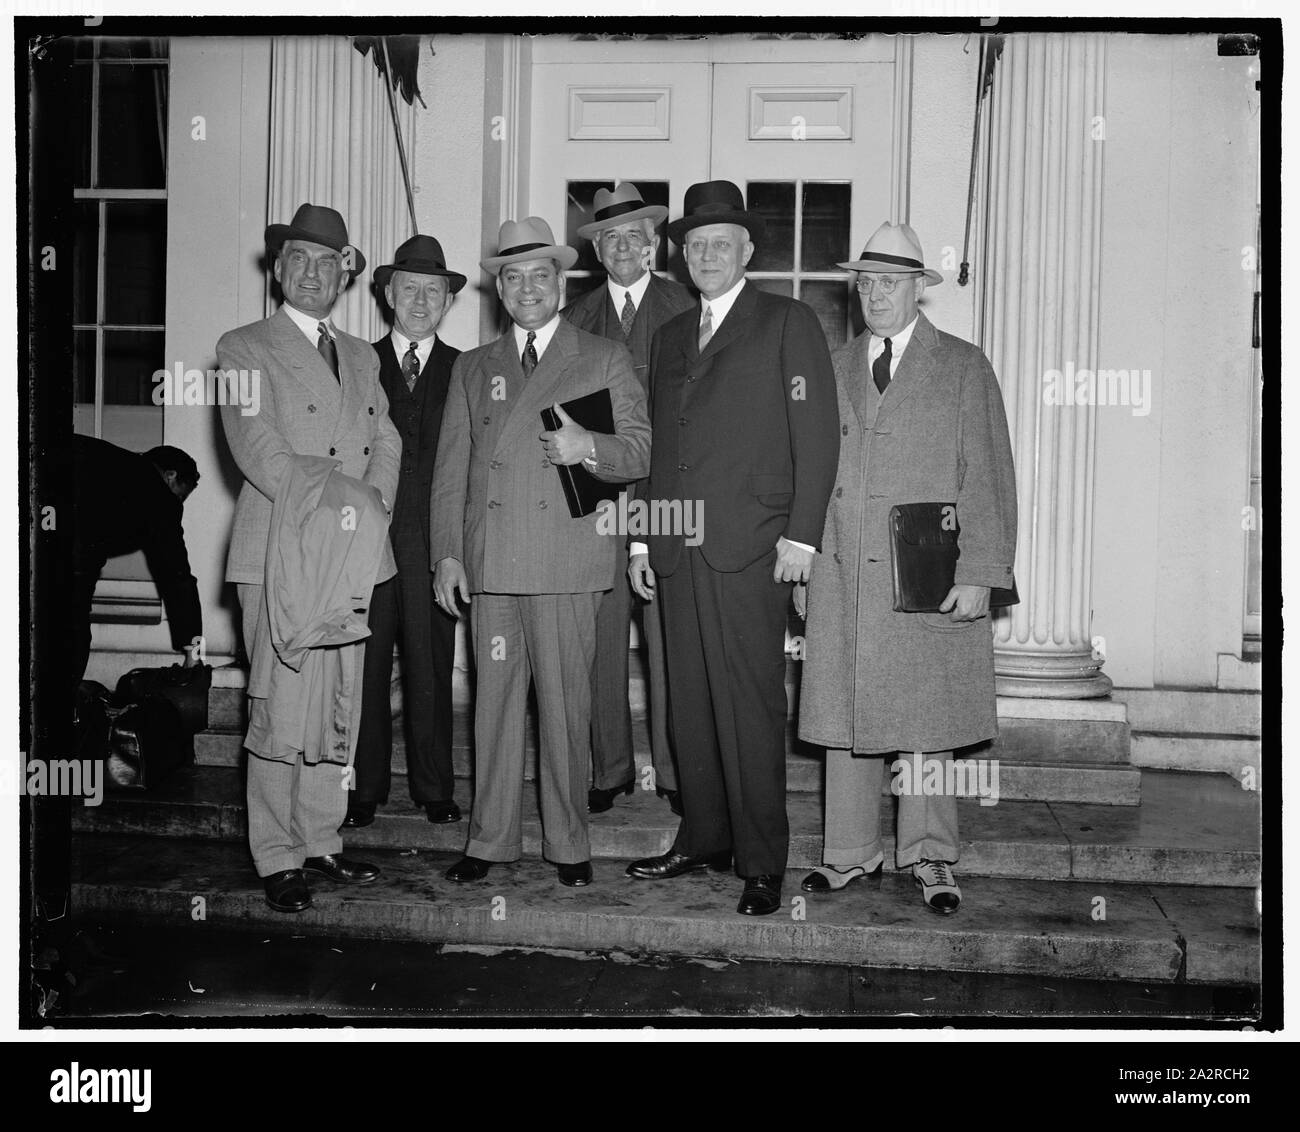 Rail management and Labor executives confer with President Roosevelt. Washington, D.C., Sept. 20. Following a conference today with representatives of Railway Management and Labor at the White House, President Roosevelt announced that he had named an informal six-man committee to devise a broad plan of rail aid legislation for the next congress. The committee comprises three rail management executives and three rail labor chiefs. Attending today's conference were, left to right: Ernest E. Norris, President of the Southern R.R.; D.B. Robertson, representing locomotive firemen and engineers; Geo Stock Photo